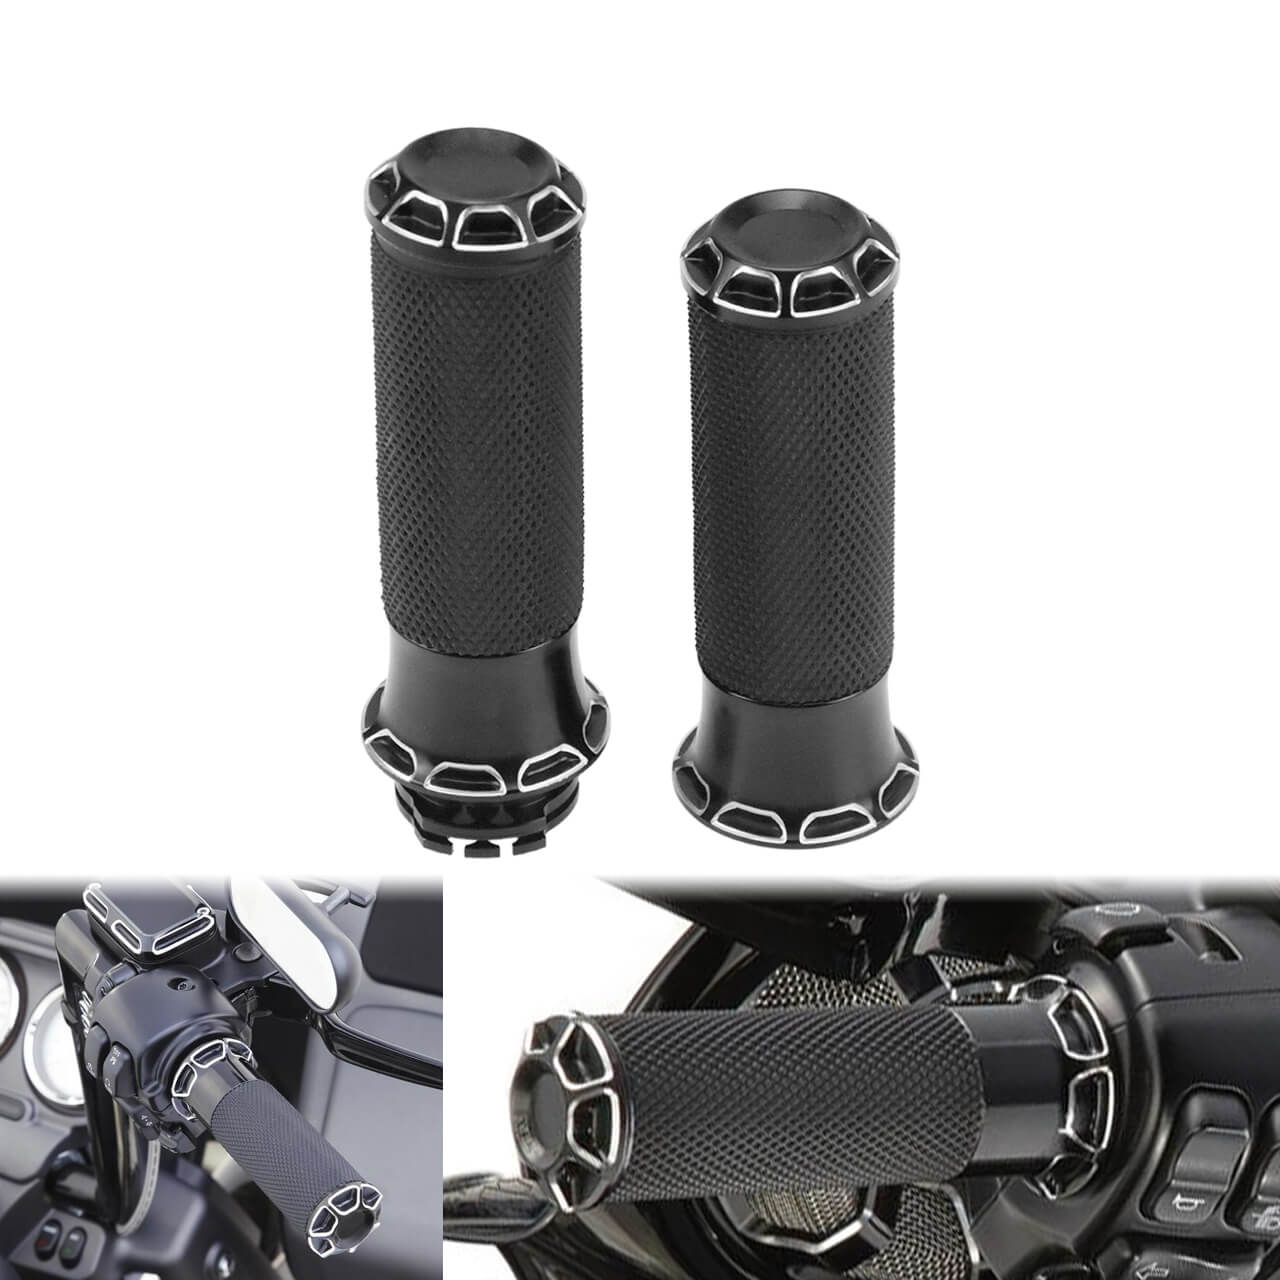 MP0703-Non-Electronic-Hand-Grips-for-motorcycle